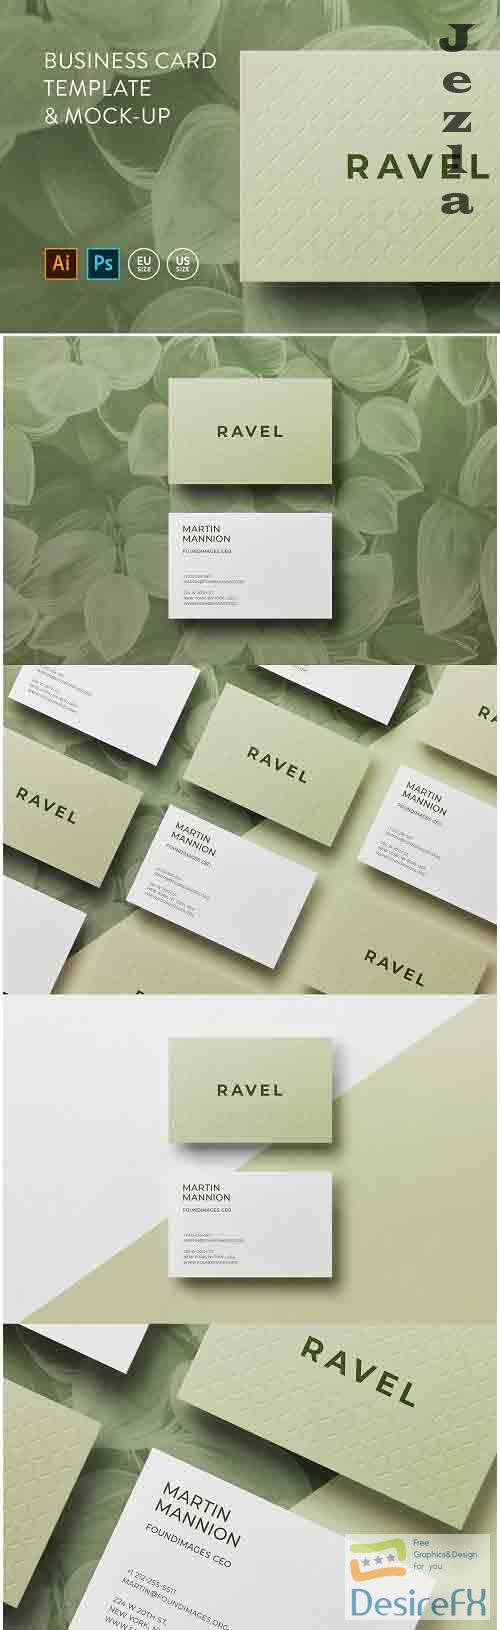 Business card Template &amp; Mock-up #6 - 63941